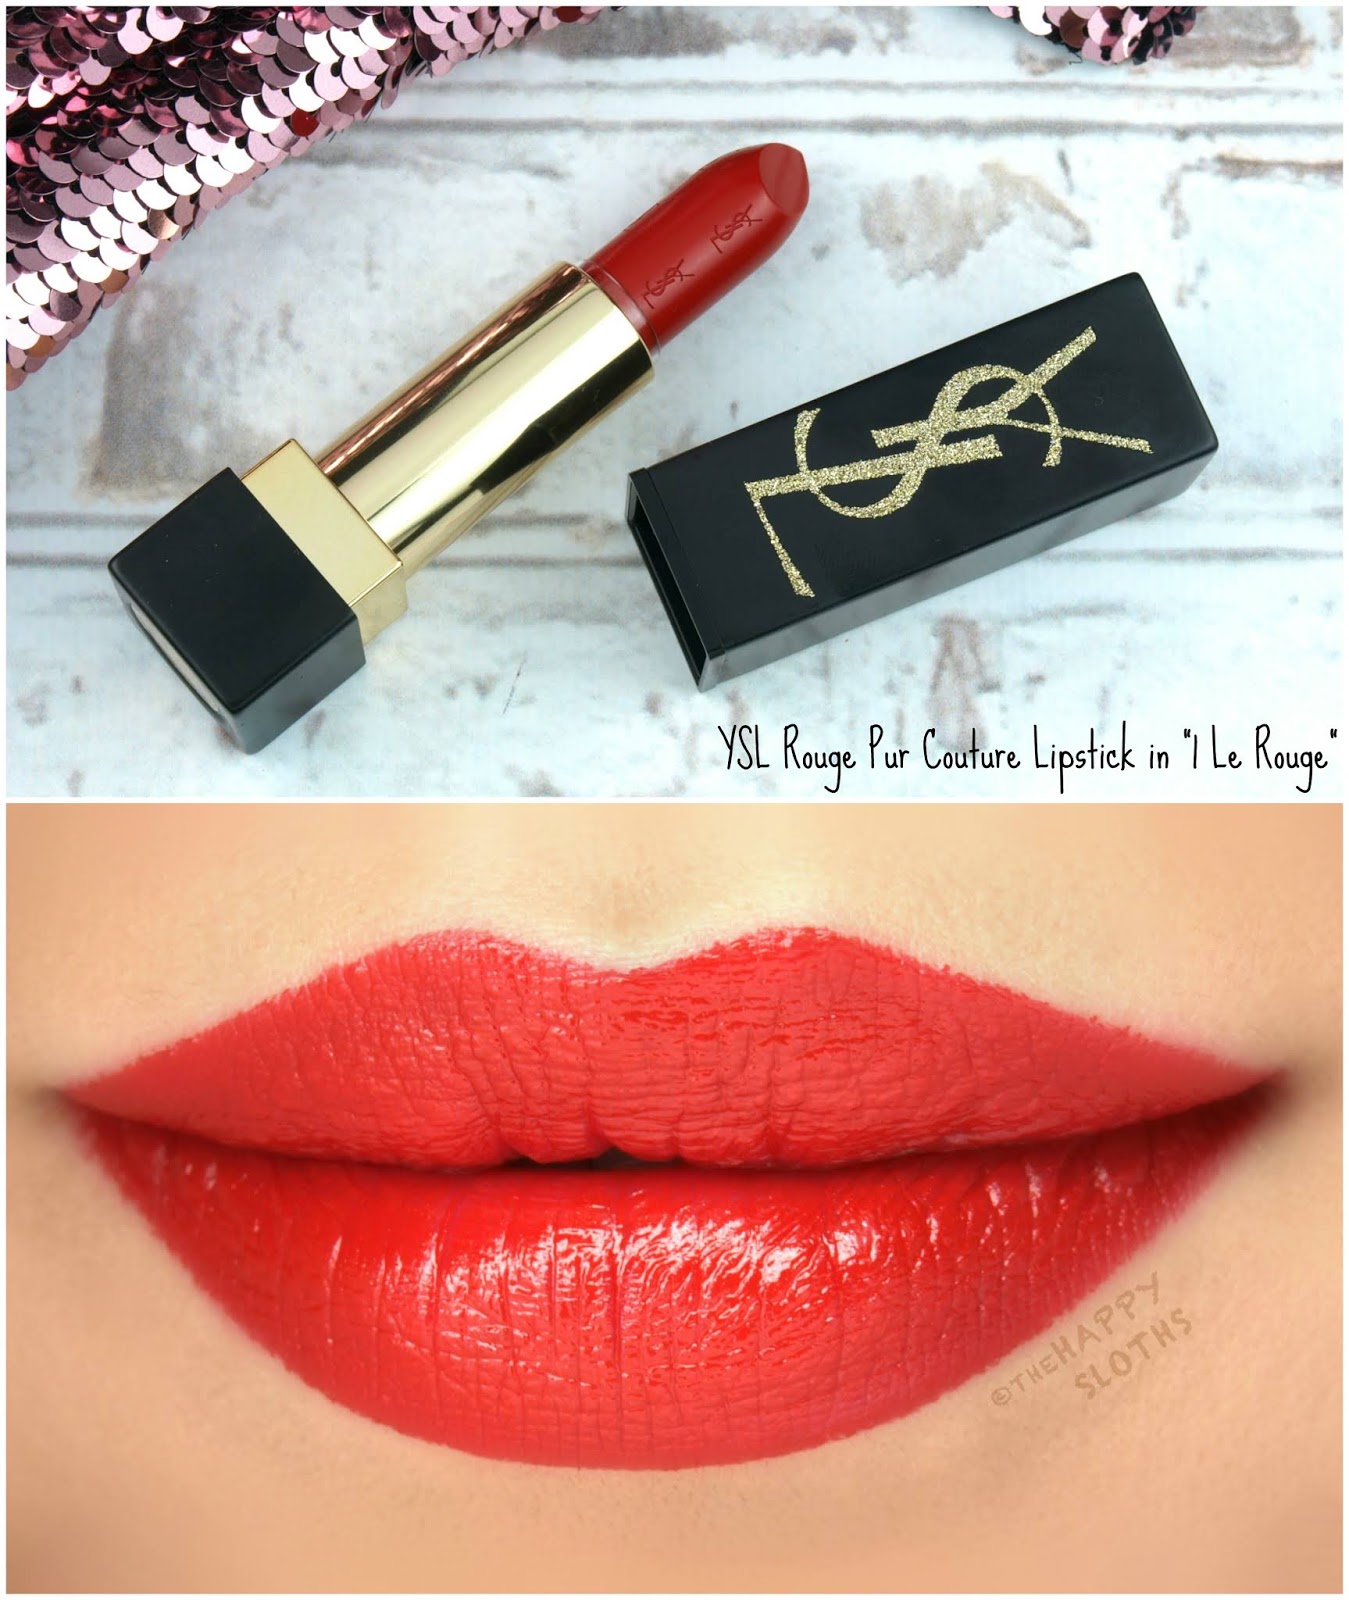 Yves Saint Laurent YSL | Holiday 2018 Gold Attraction Edition Rouge Pur Couture Lipstick in "1 Le Rouge": Review and Swatches